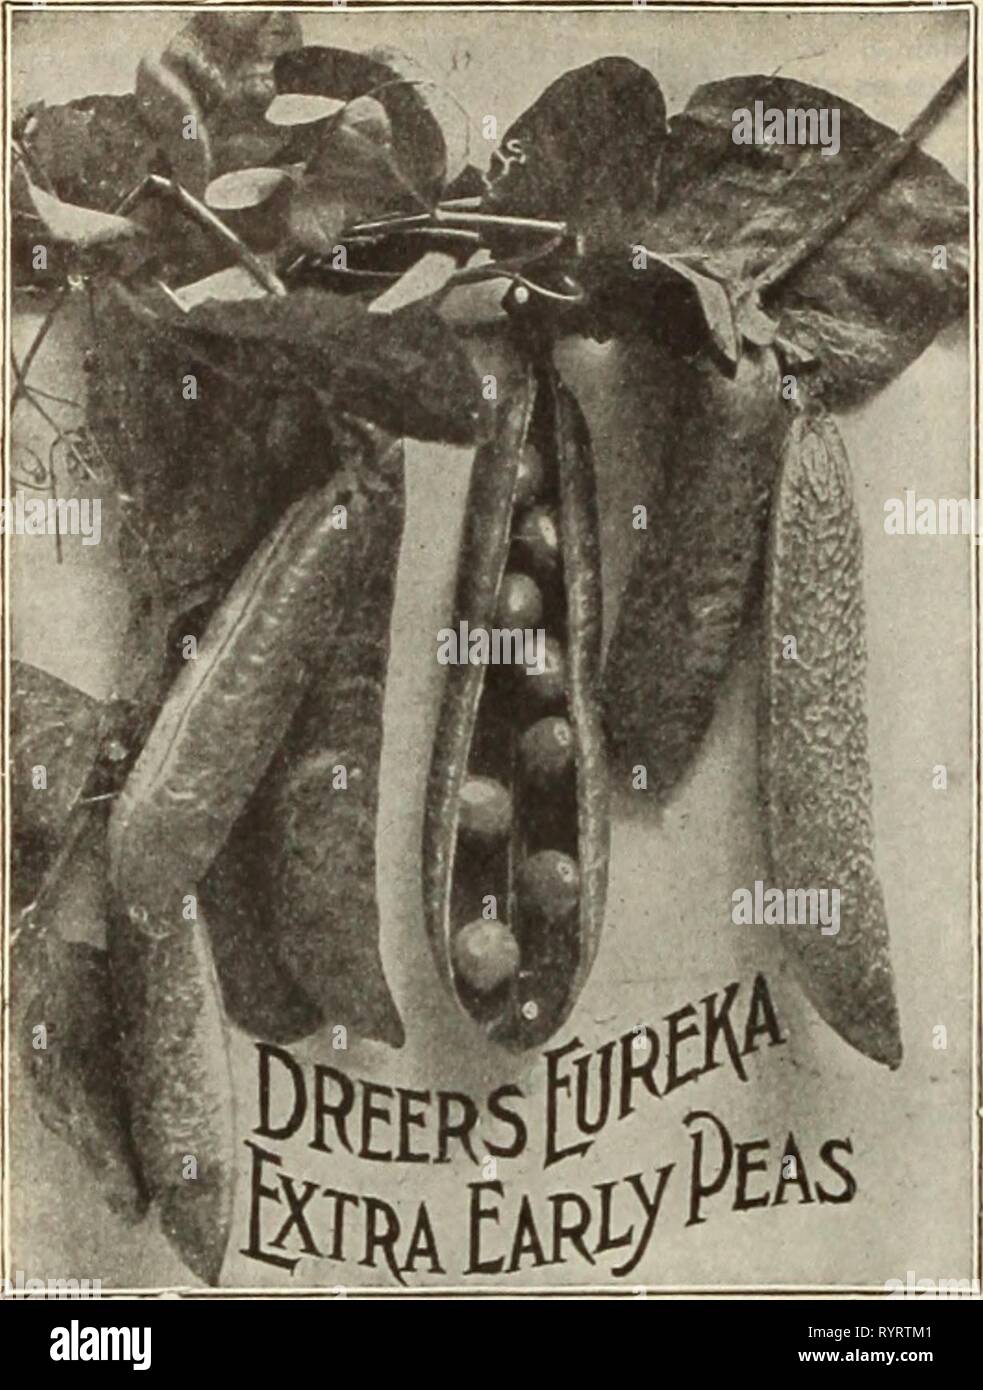 Dreer's mid-summer catalogue 1915 (1915) Dreer's mid-summer catalogue 1915 . dreersmidsummerc1915henr Year: 1915  58 HENRY A. DREER, PHILADELPHIAâVEGETABLE SEEDS    PARSLEY. I'k-t. Oz. J-lb. Dreer's Dwi. Perfection 10 35 $1 00 Dreer's Summer Green 5 Dwf. Ex. C'led Perpetual 5 Champion Moss Curled 5 Half Curled.... 5 Fern Leaved 5 10 15 15 15 15 Lb. $3 50 1 00 1 25 1 25 1 25 1 25 PEAS. Plant everi/ two iree/.s until August. Prices for Peas of all kinds are for same by express or freight at purchaser's expense. If wanted sent by Parcel Post add as followst To points East of Mississippi River, 8  Stock Photo